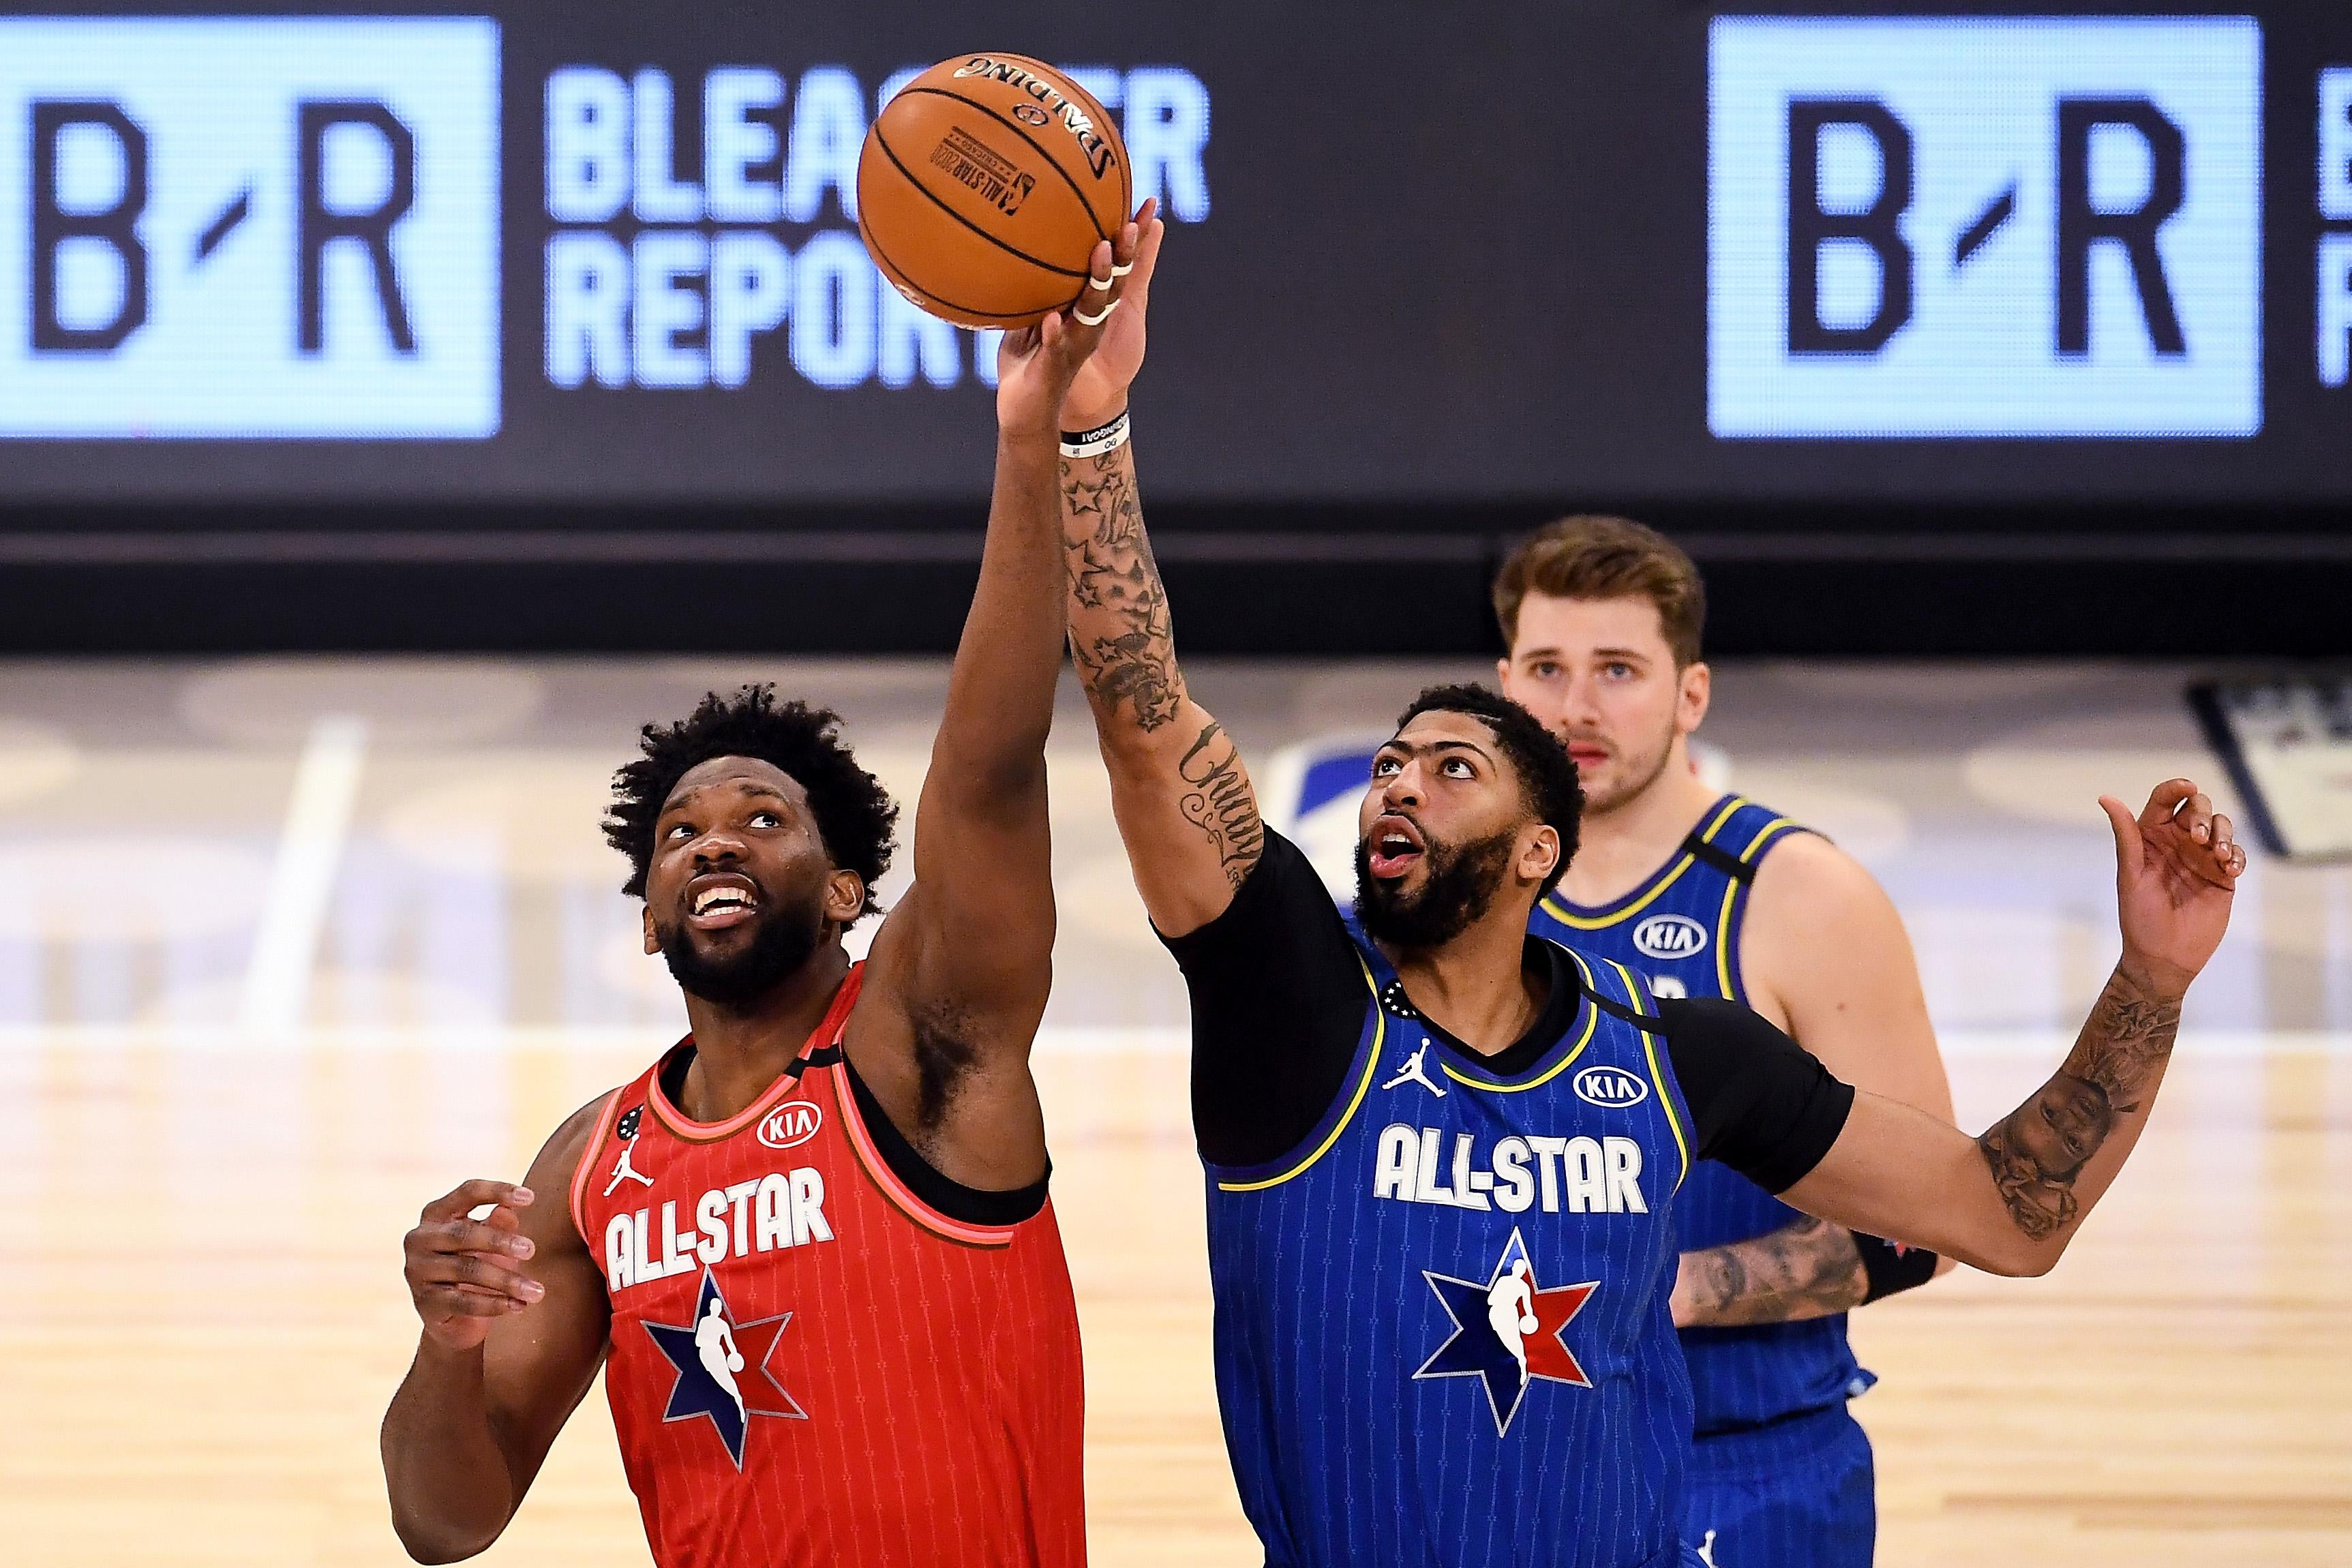 Joel Embiid and Anthony Davis battle for a tip-off during the NBA All-Star Game; Luka Doncic looks on in the background.